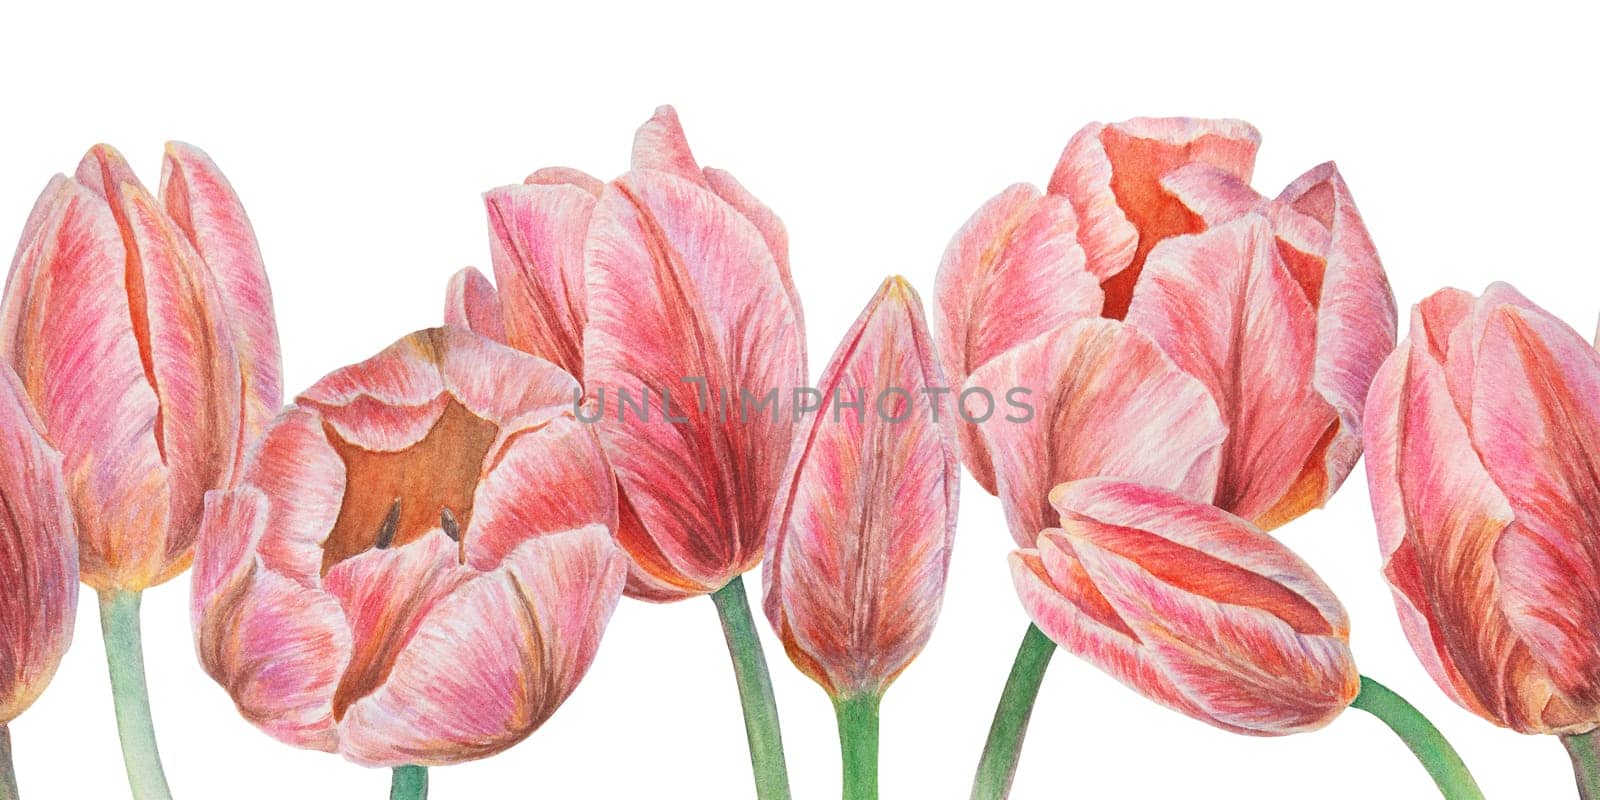 Pink tulips seamless border painted in watercolor, realistic botanical hand drawn illustration isolated on white background for design, wedding print products, paper, invitations, cards, fabric by florainlove_art